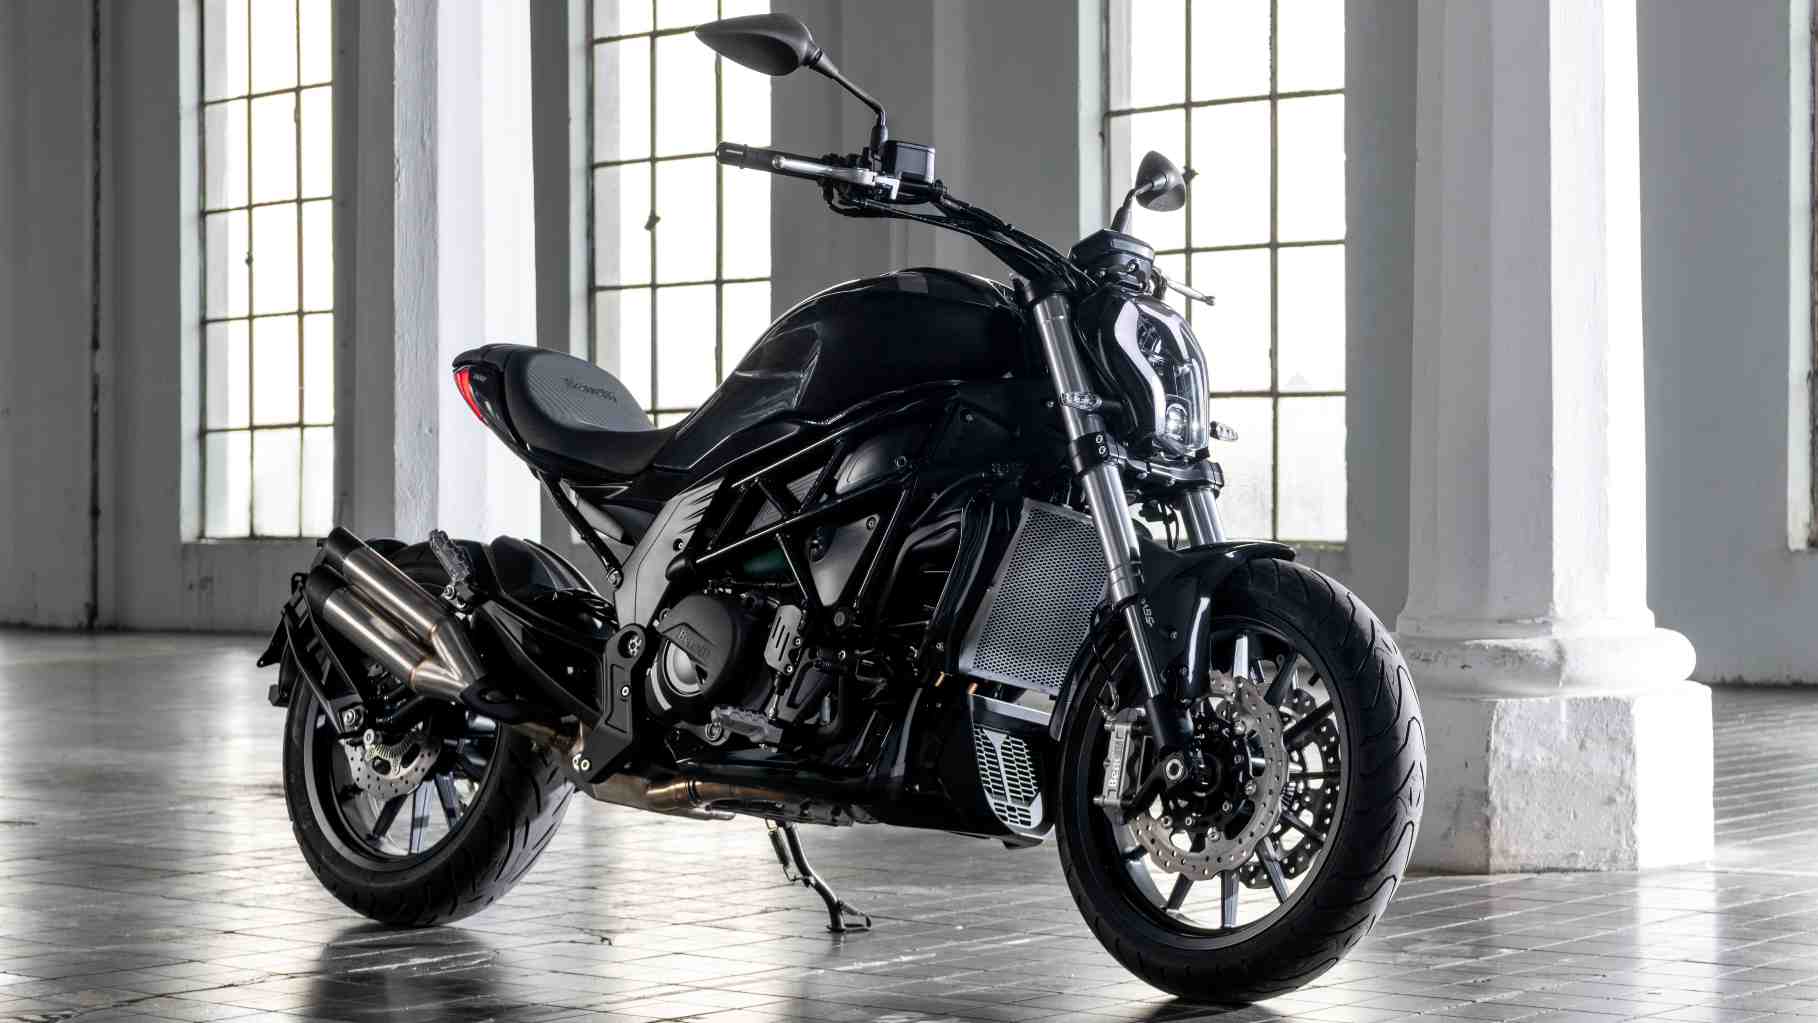 The Benelli 502C has the same wheelbase length as the bike it derives design inspiration from - the Ducati Diavel. Image: Benelli